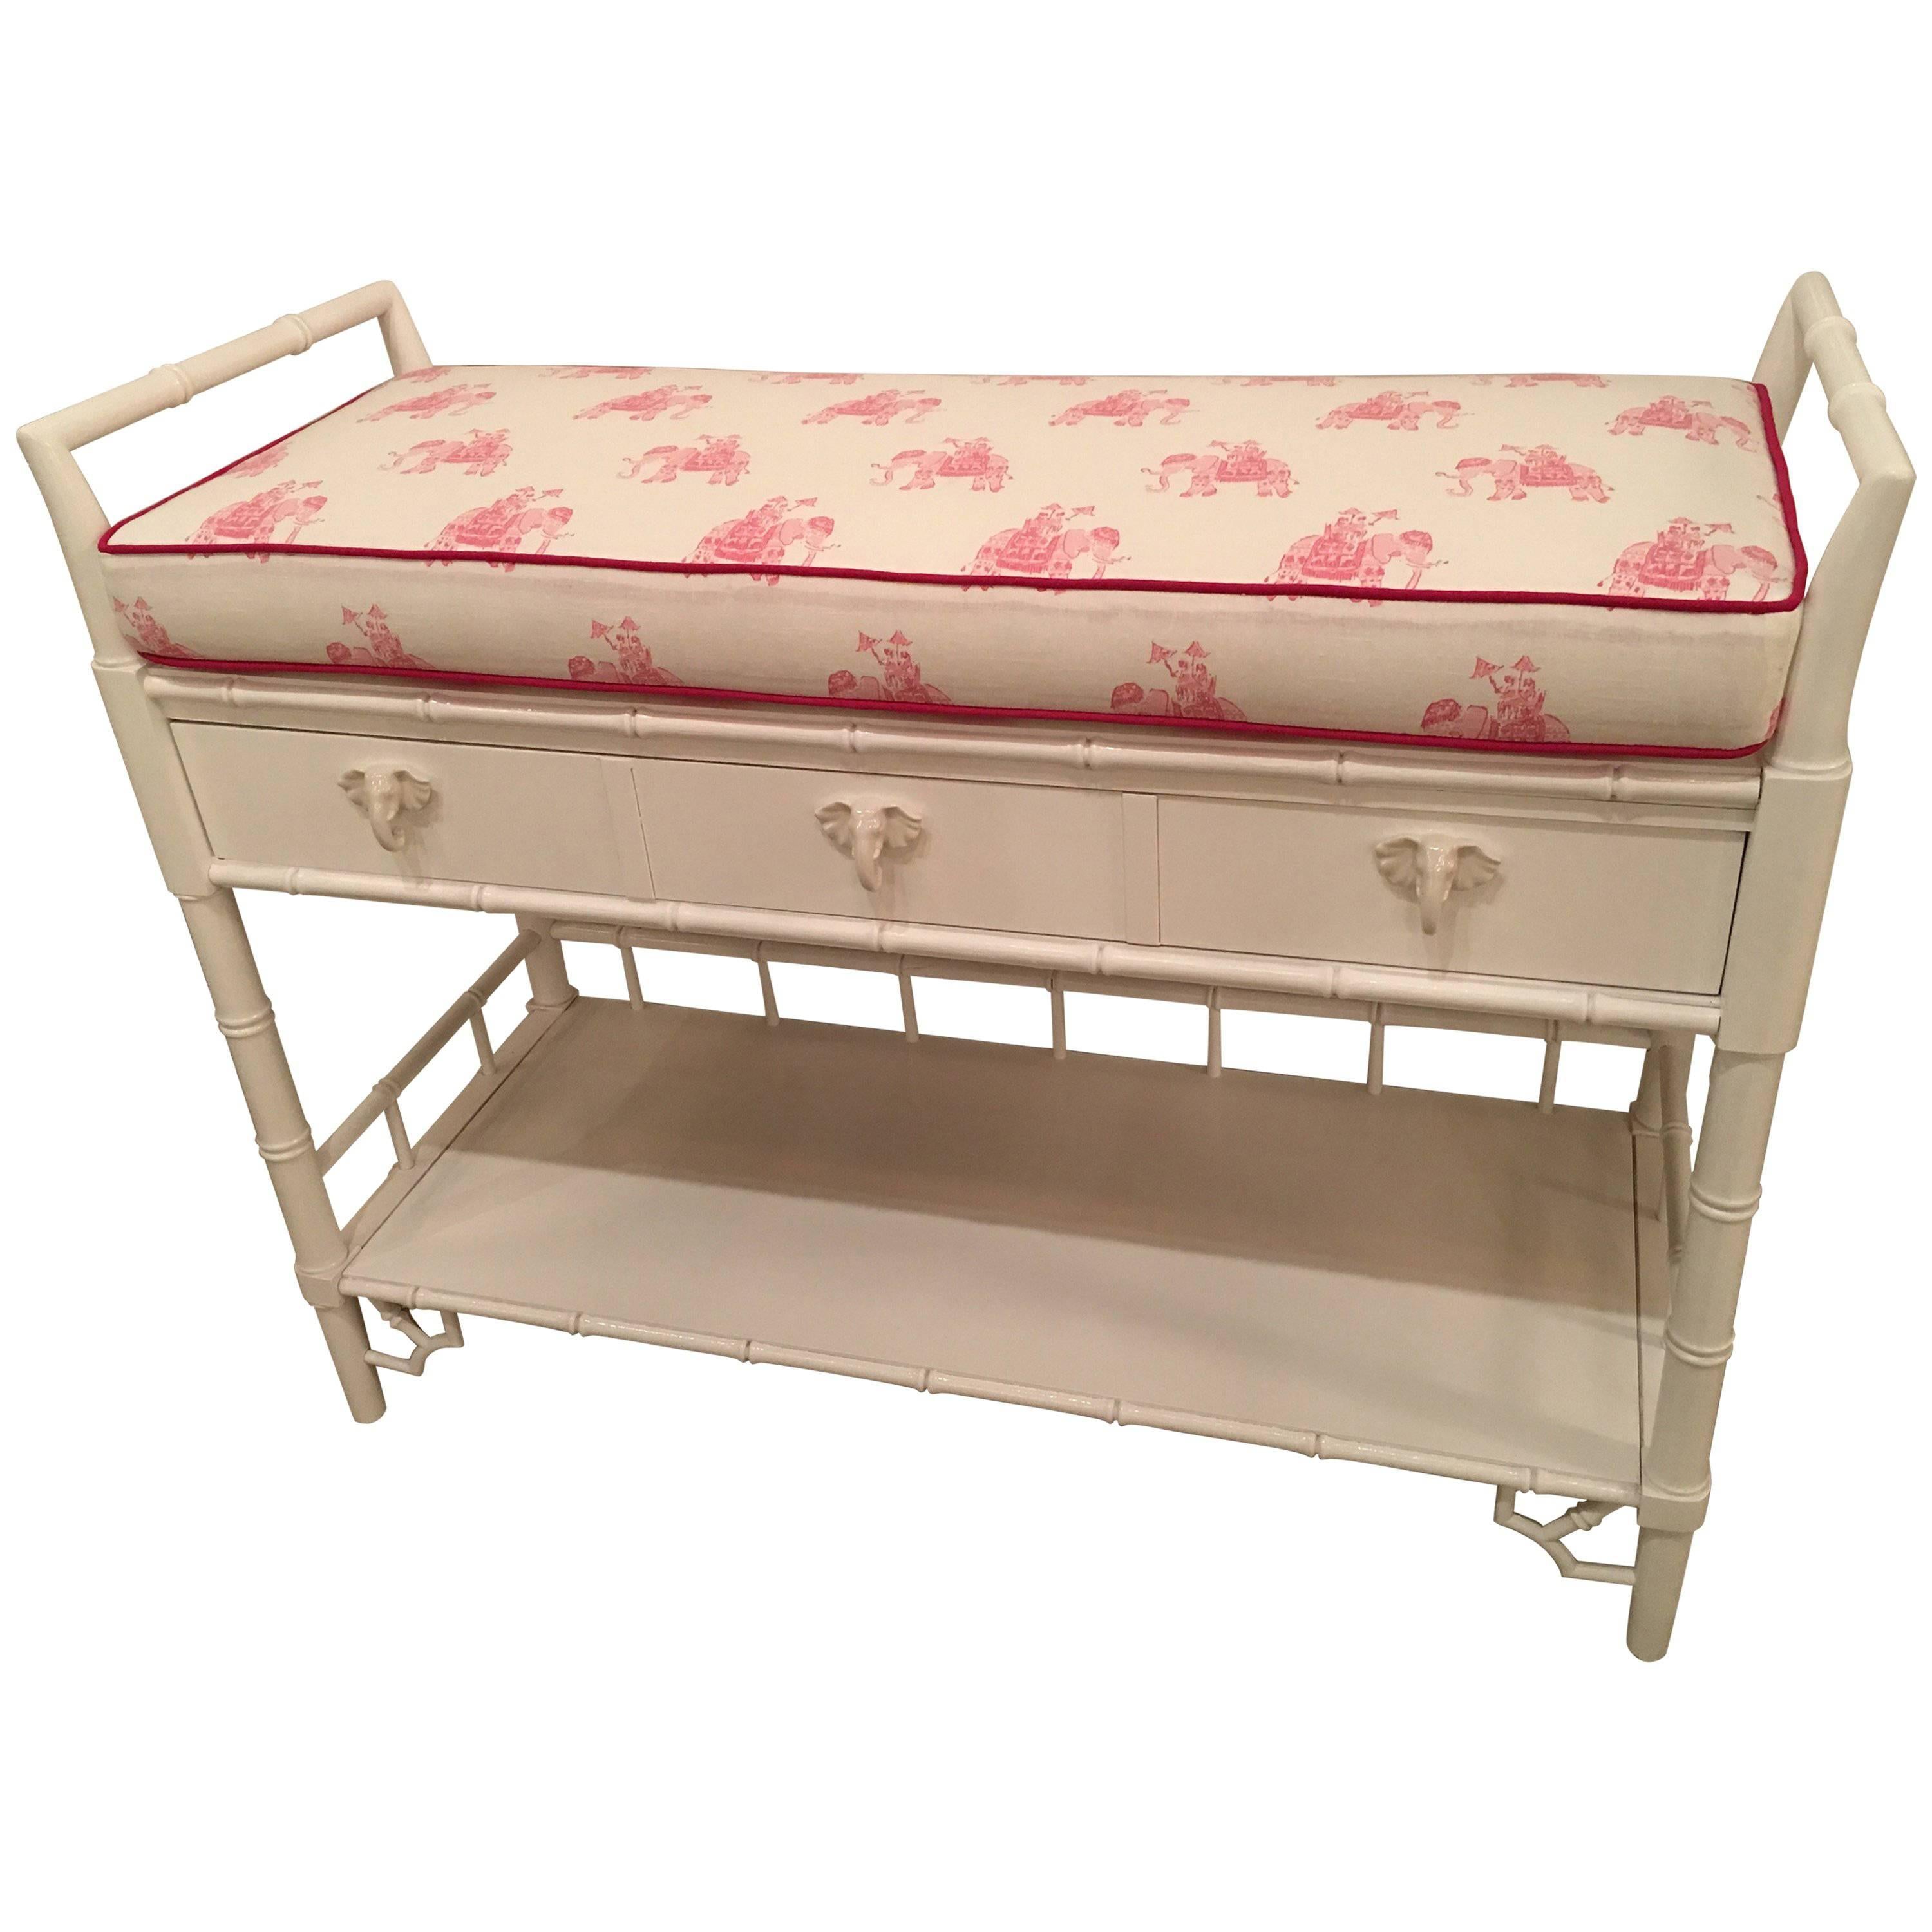 Faux Bamboo Baby Changing Table Lilly Pulitzer Elephant Pink Lacquered Girl